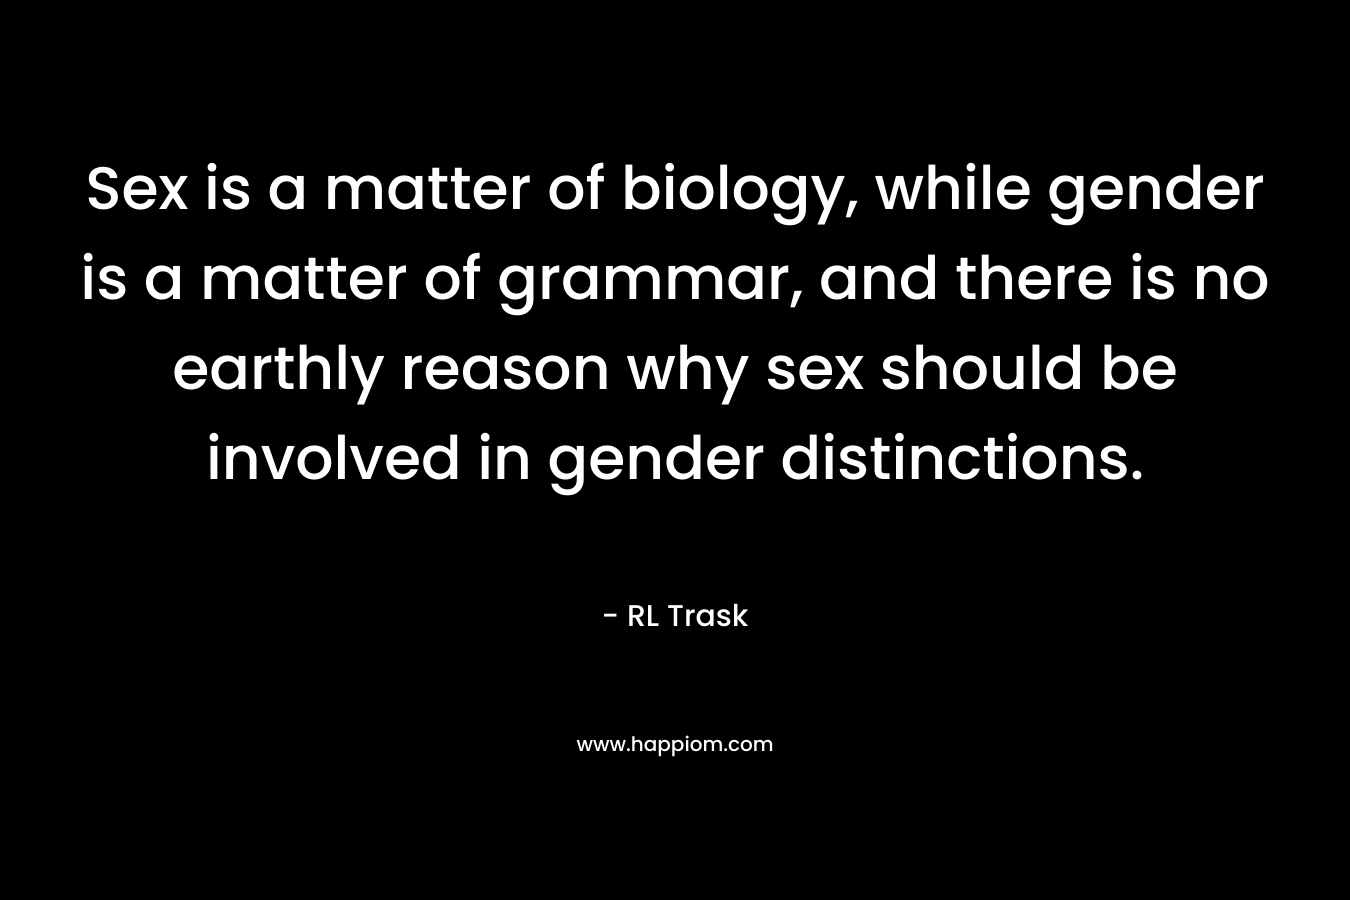 Sex is a matter of biology, while gender is a matter of grammar, and there is no earthly reason why sex should be involved in gender distinctions.